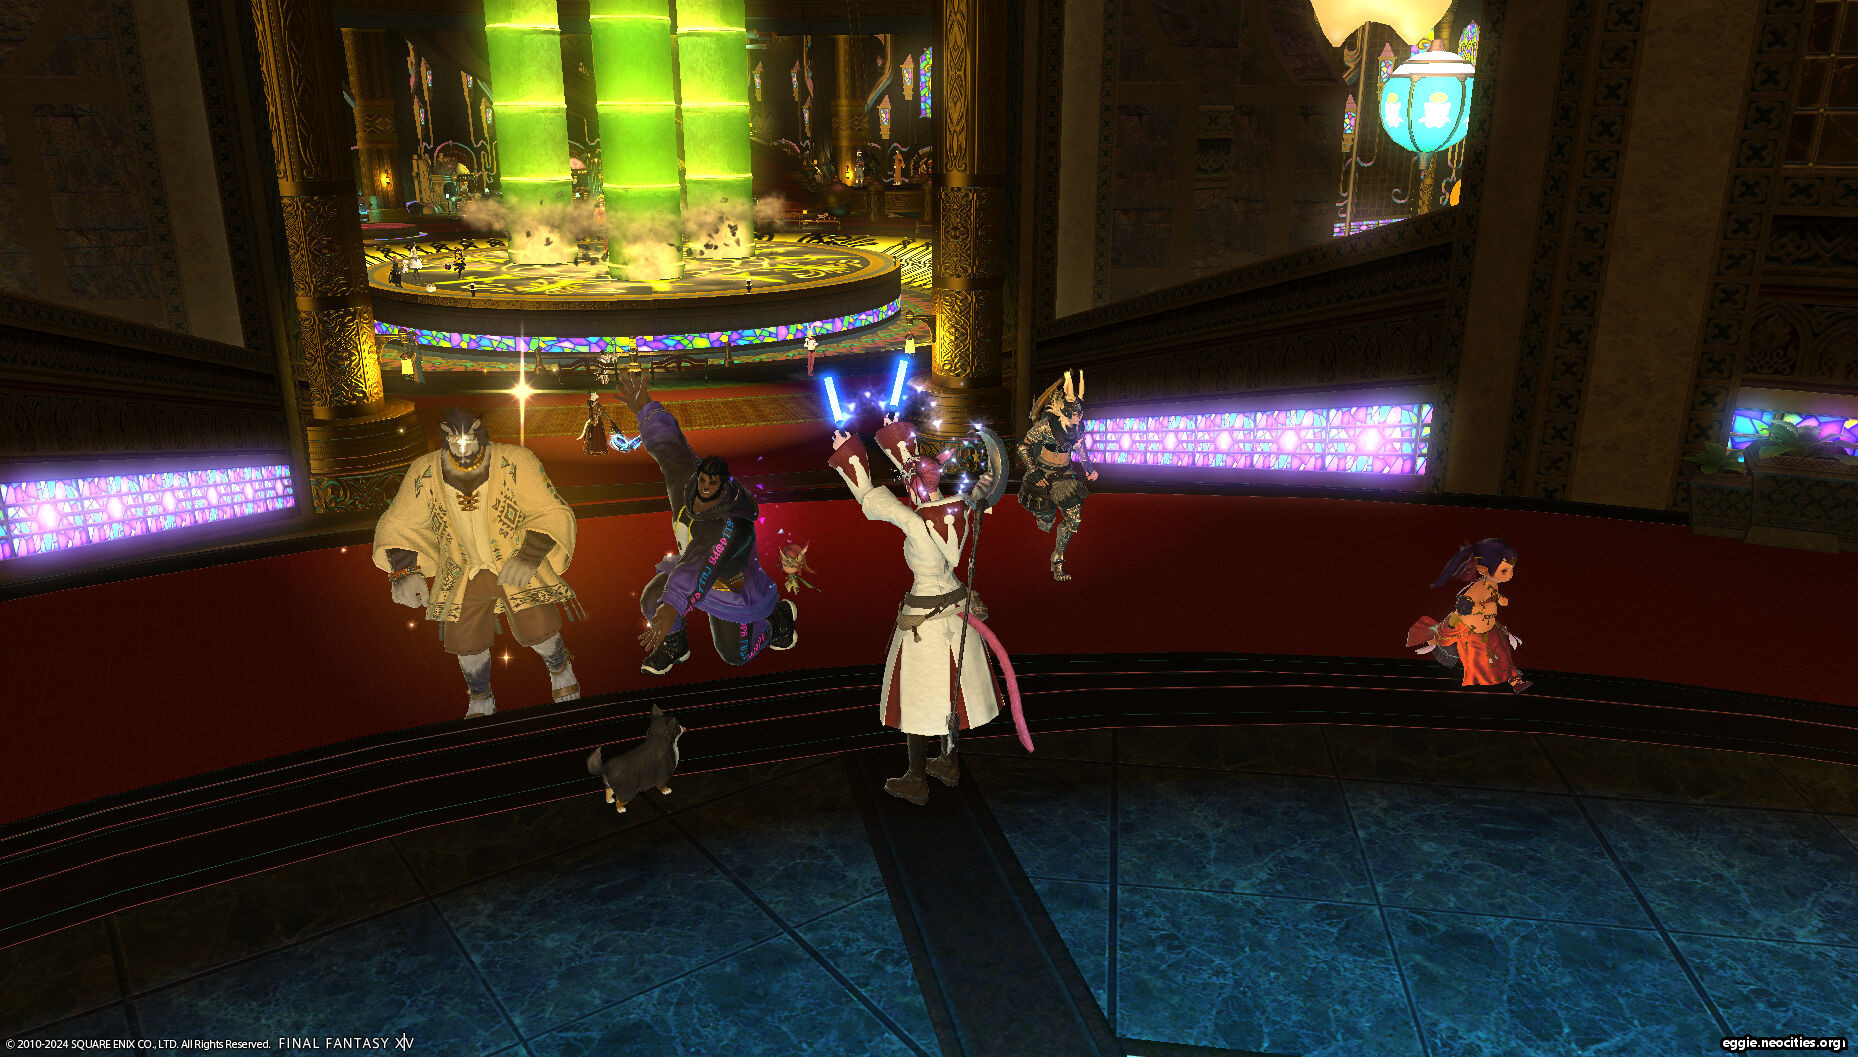 A hellsguard roegadyn using the Show Right emote on a hrothgar, covering him in sparkles. Zel is waving glowsticks at the hrothgar.